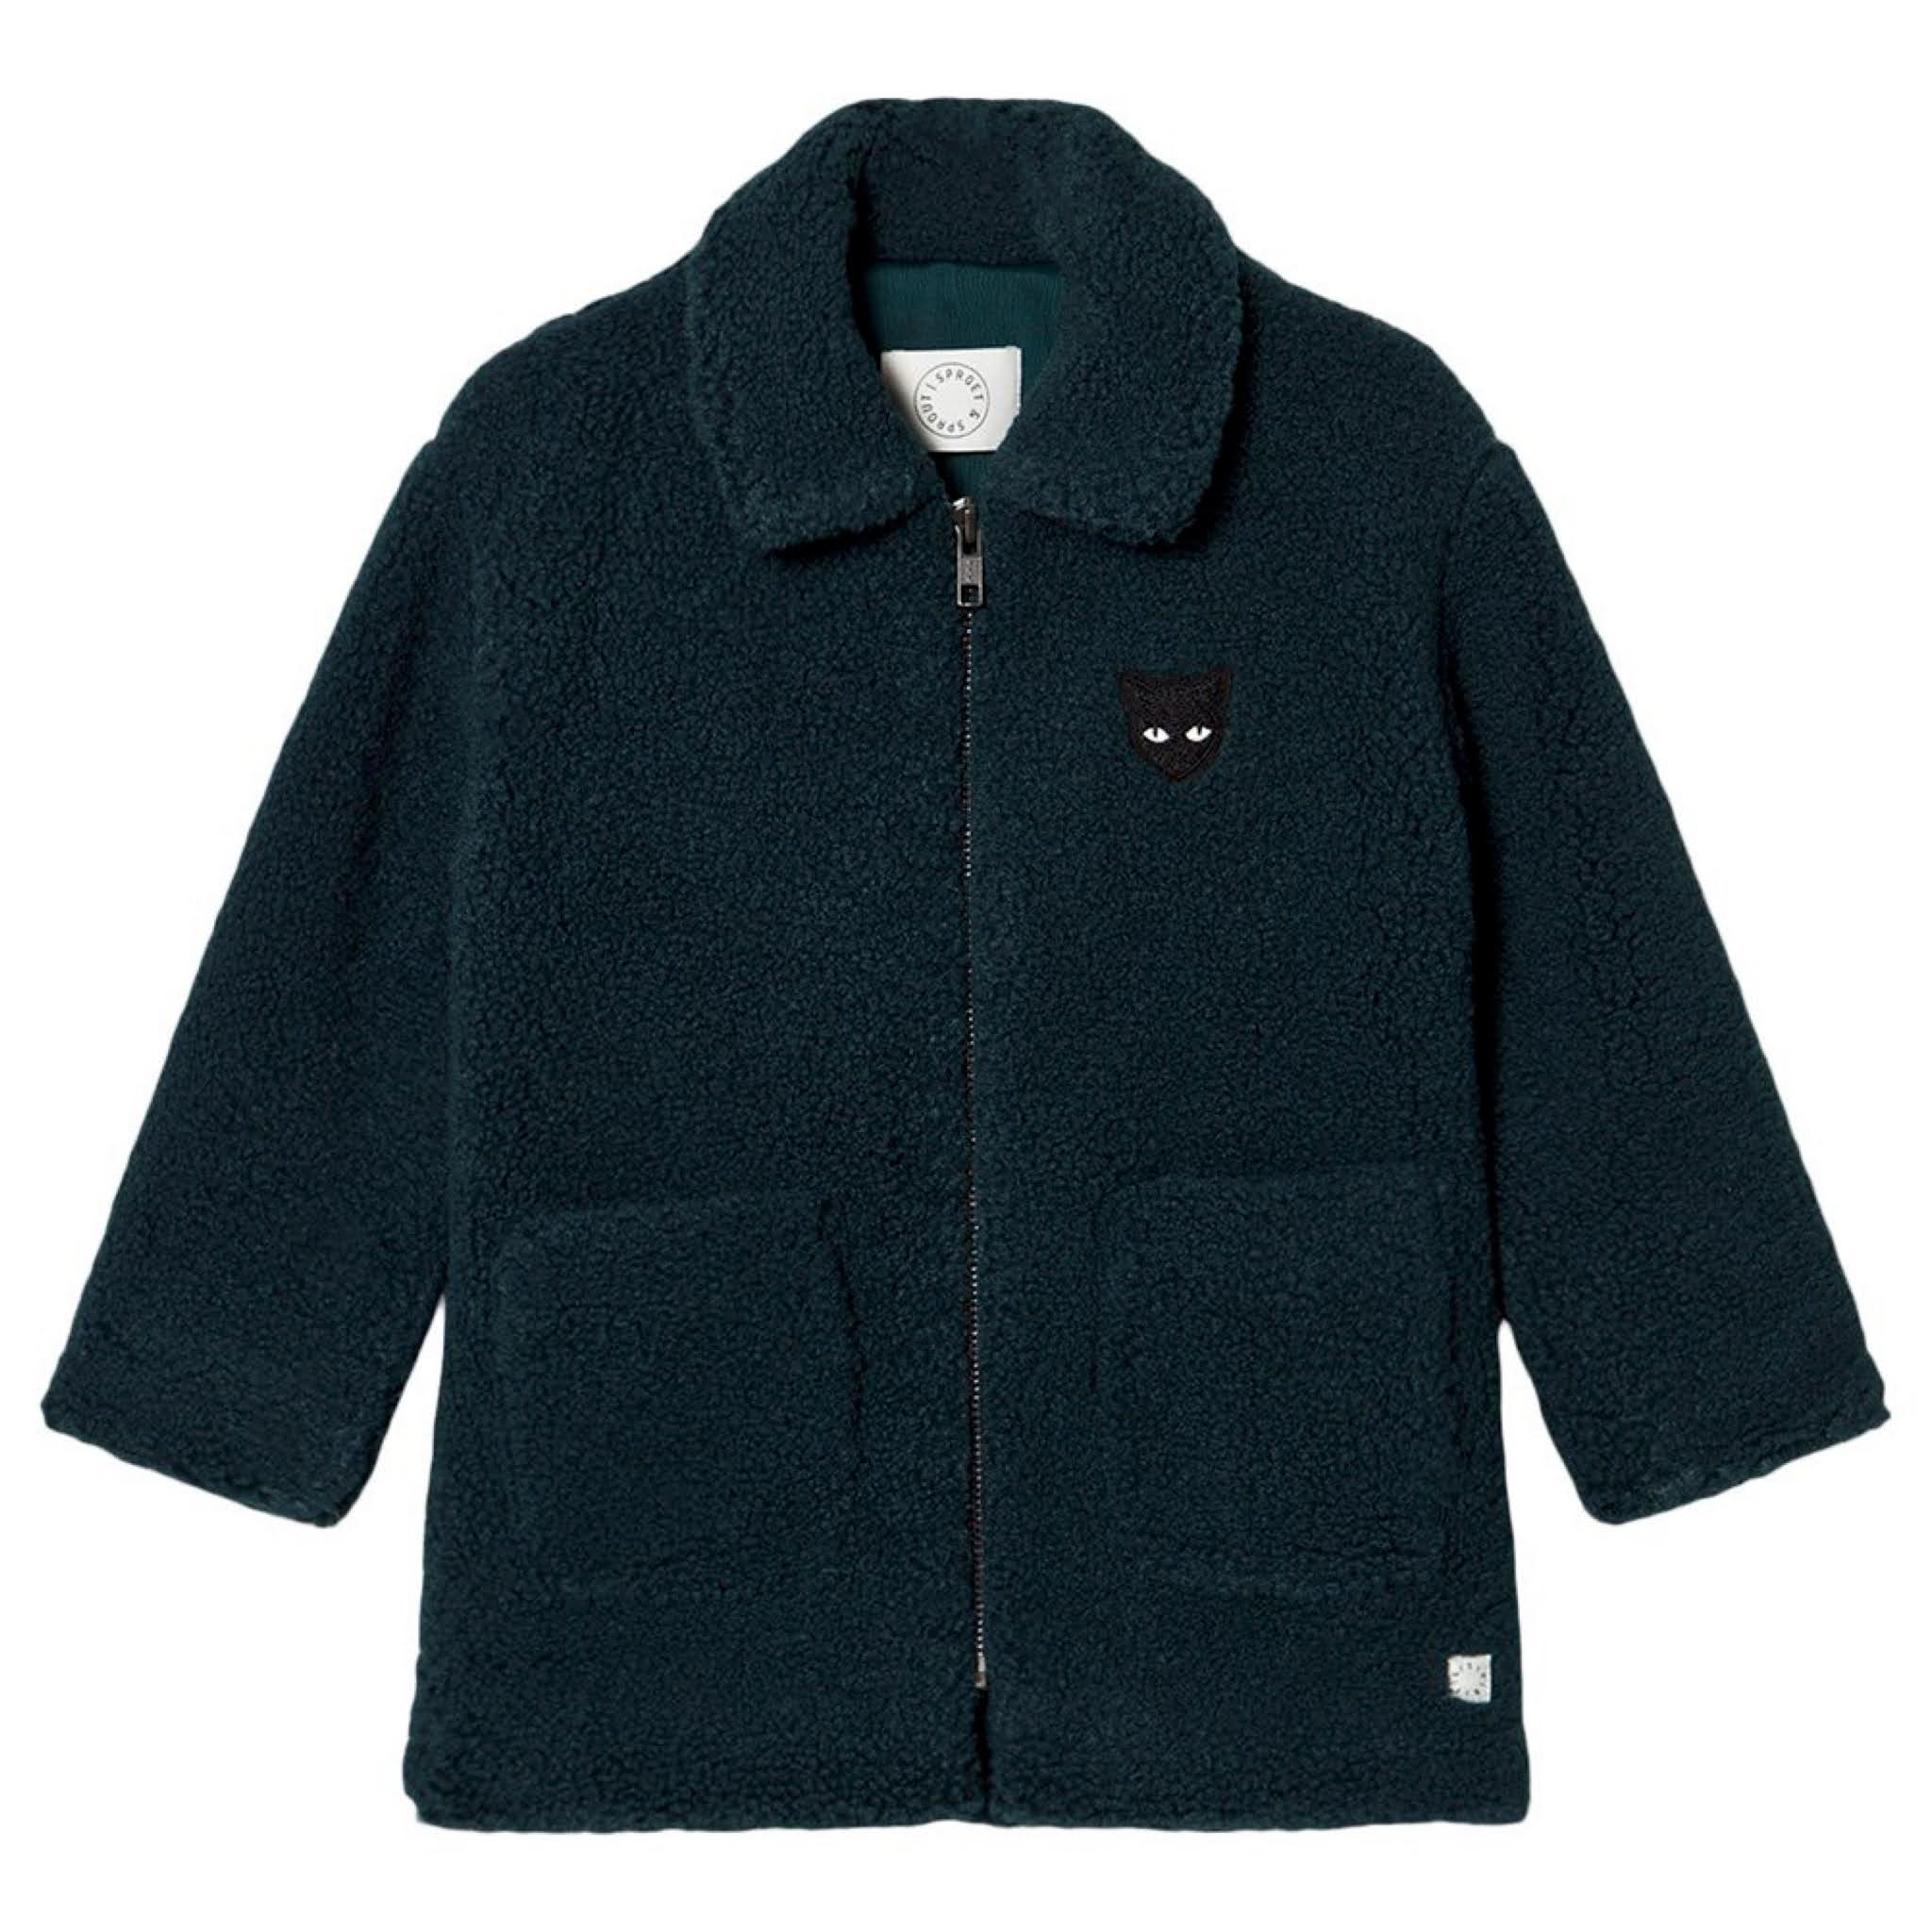 Kids Green Sherpa Coat from Sproet & Sprout